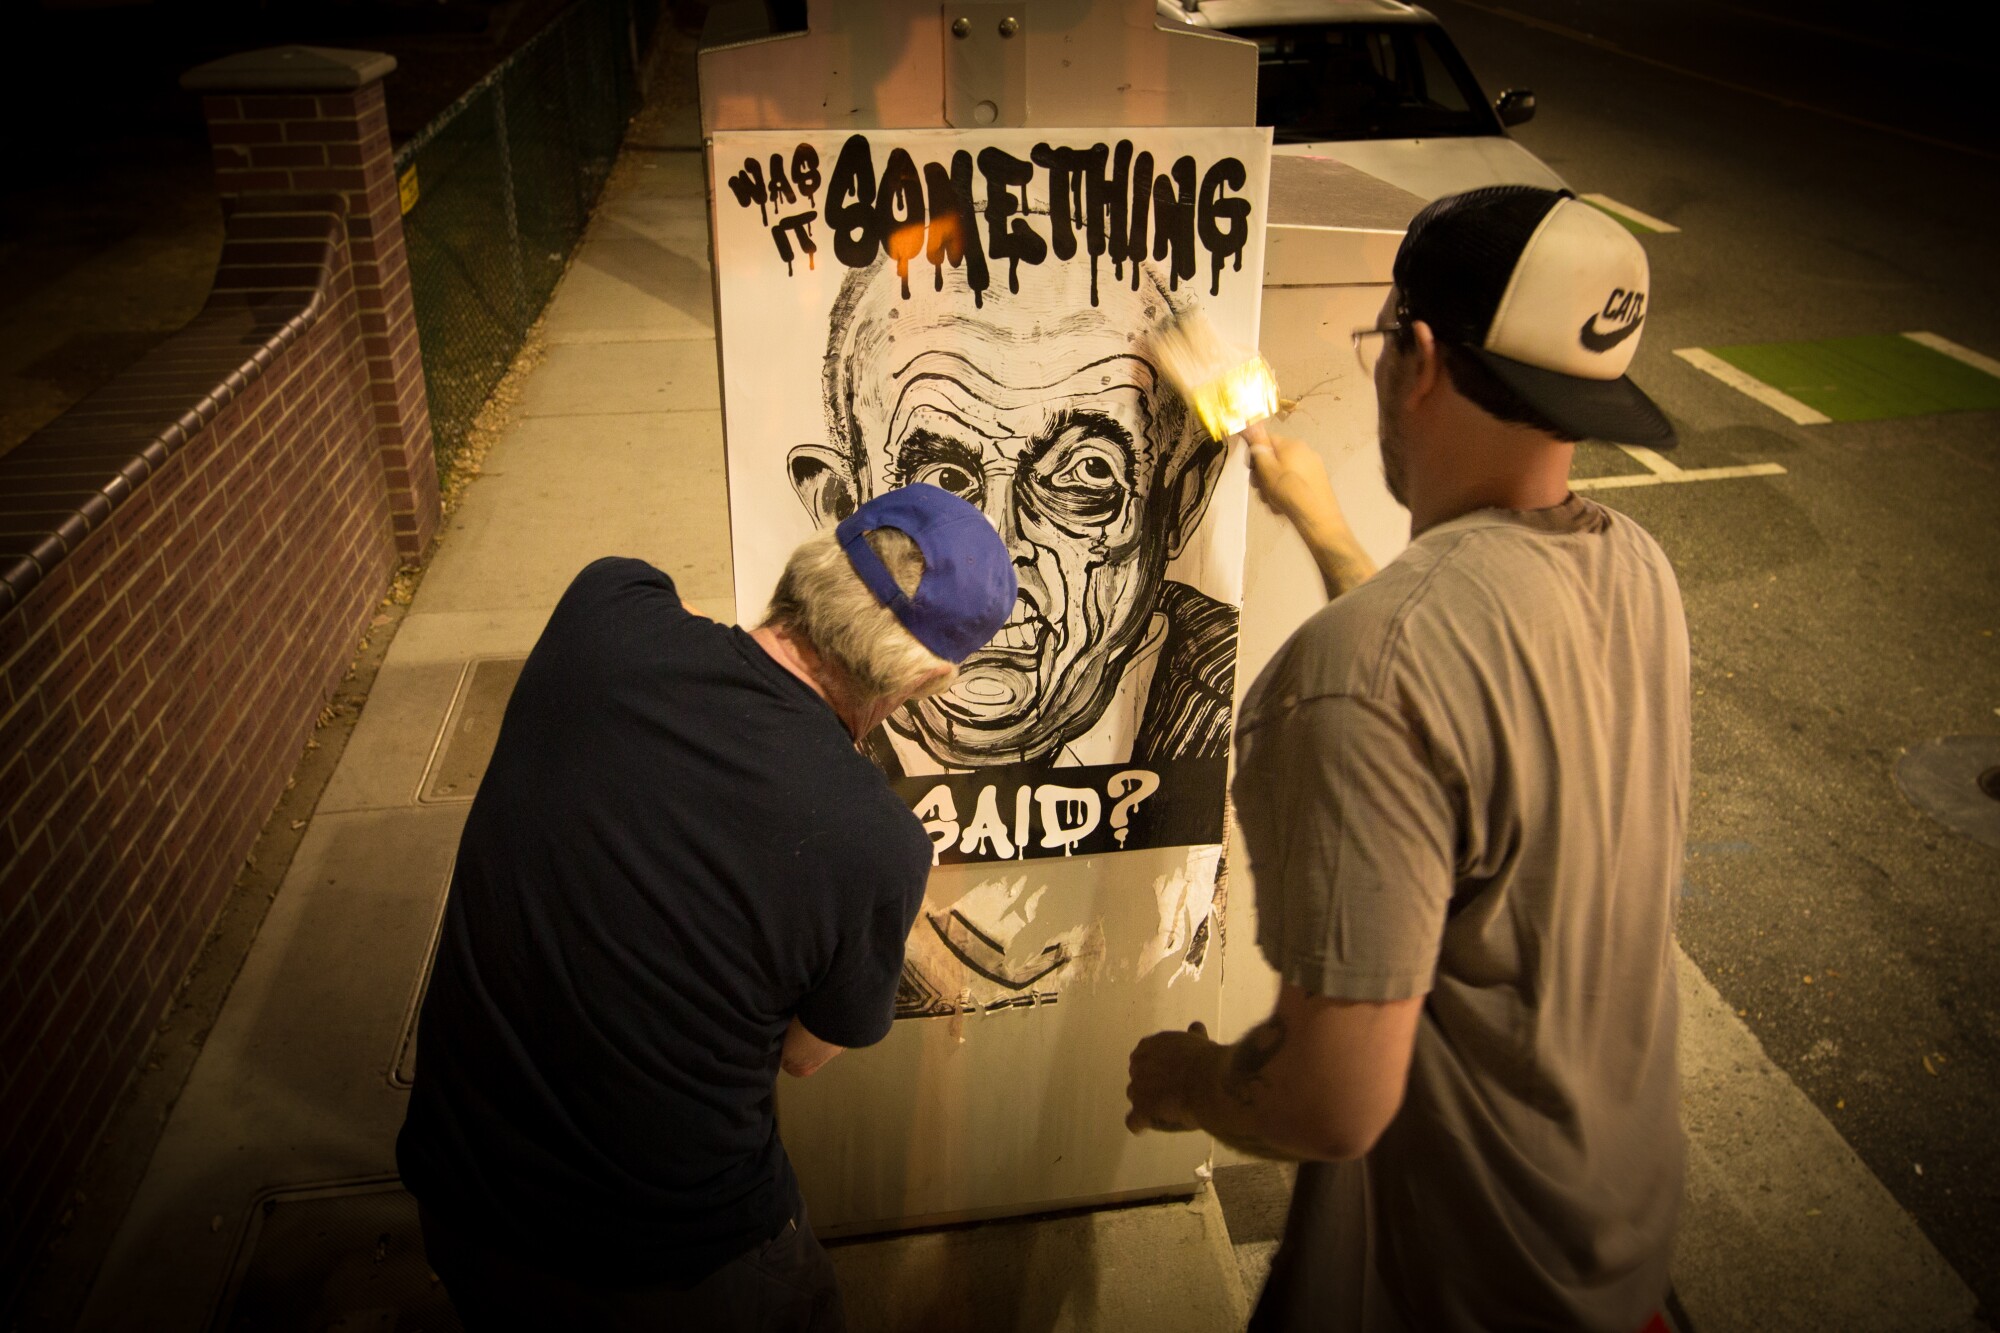 Robbie Conal and a man in a baseball cap paste a poster of Rudolph Giuliani onto an electrical box at night.